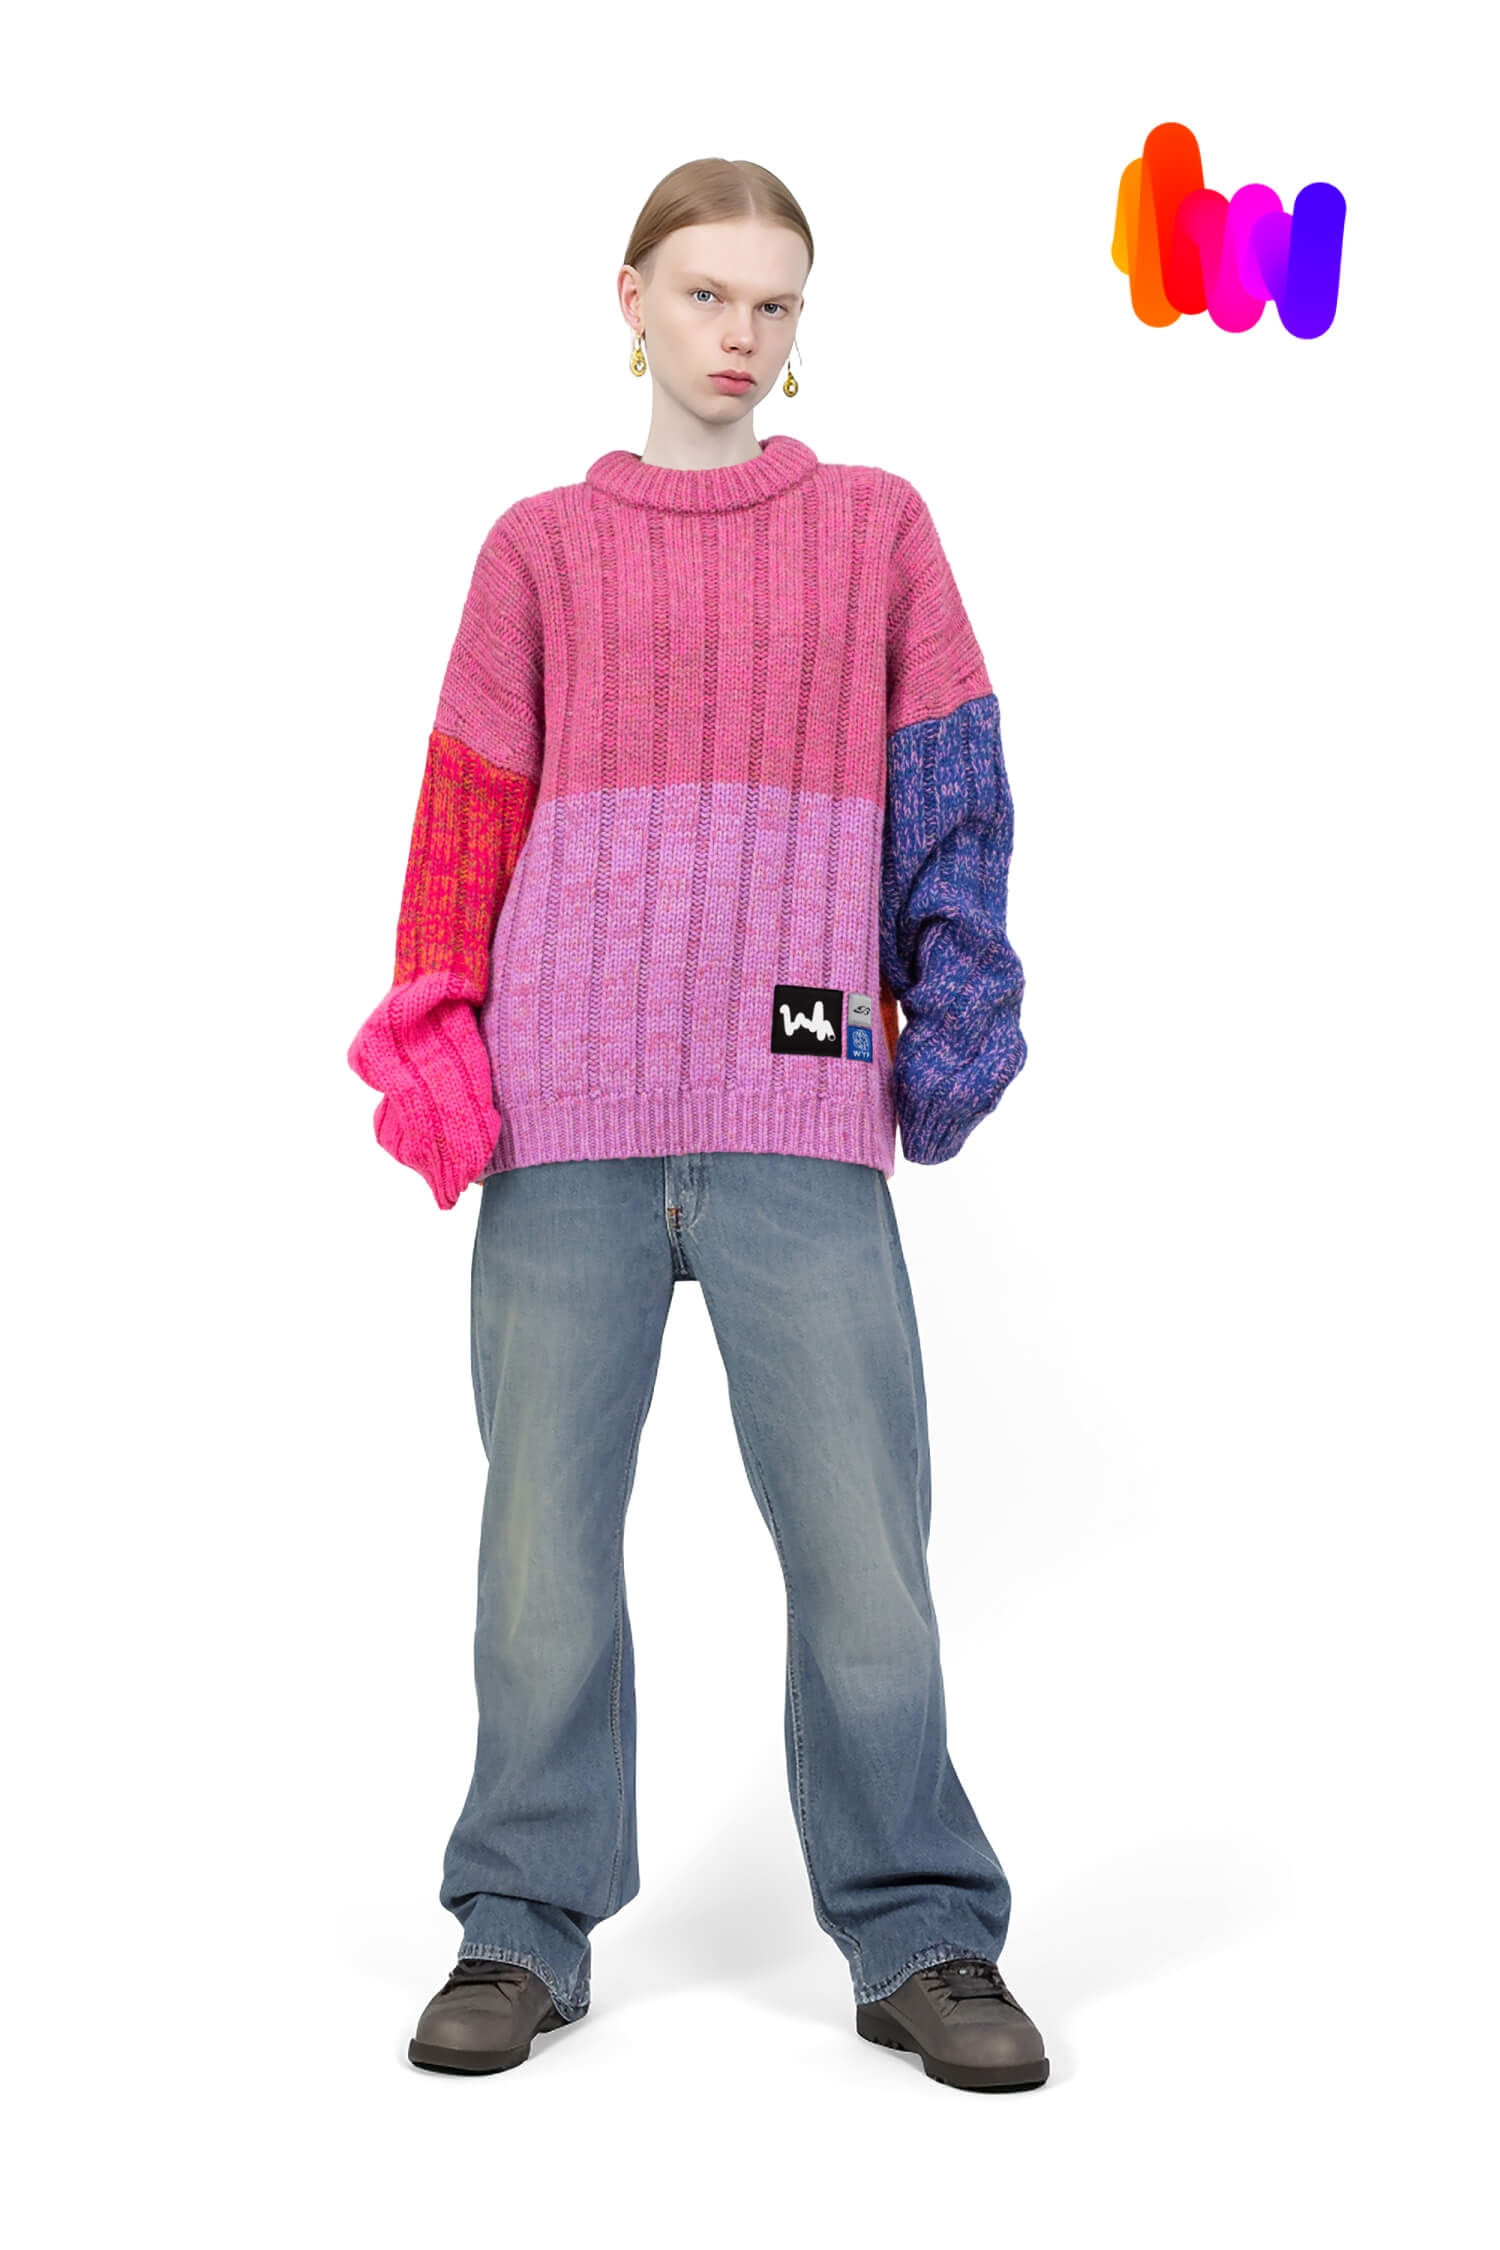 ODDS generative sweater based on Squiggle #7282 Bold on a female model